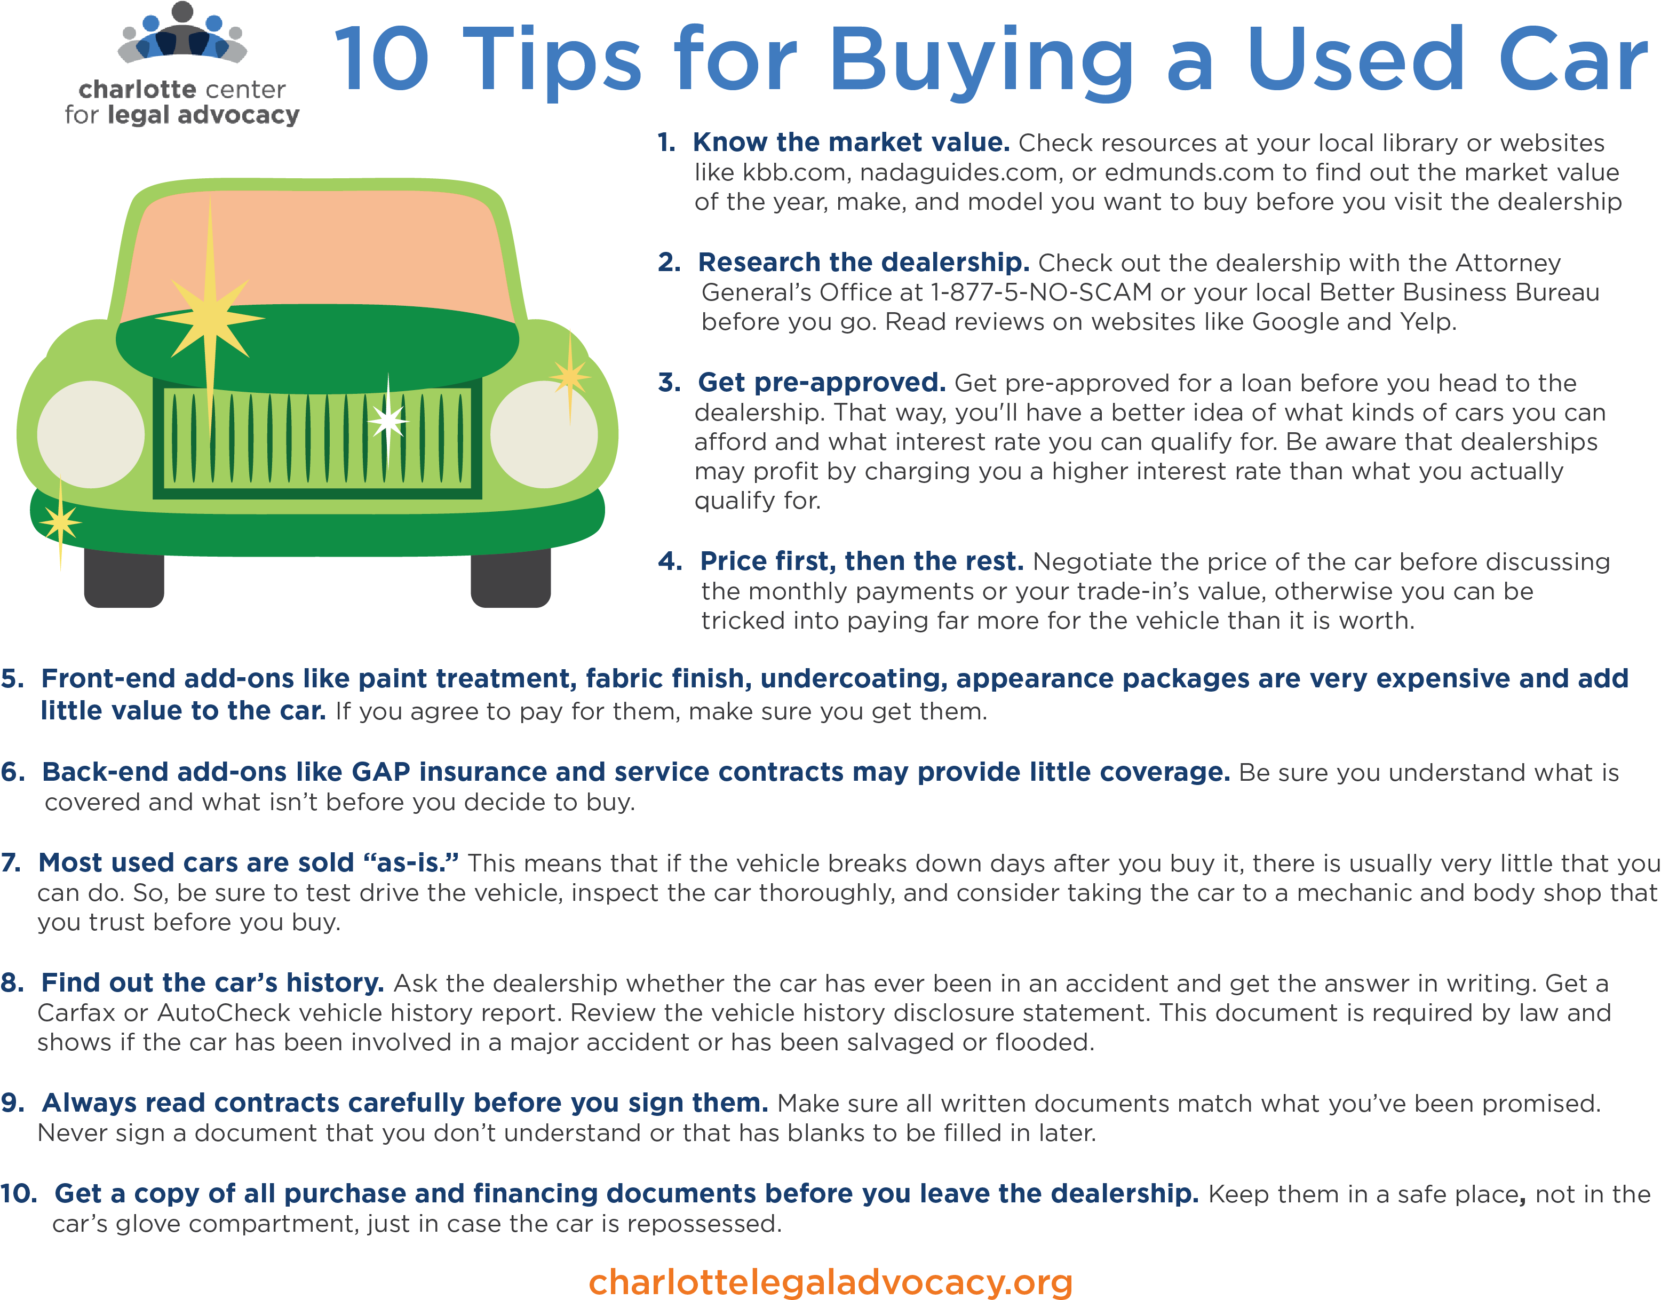 10 things to remember when buying a used car Charlotte Center for